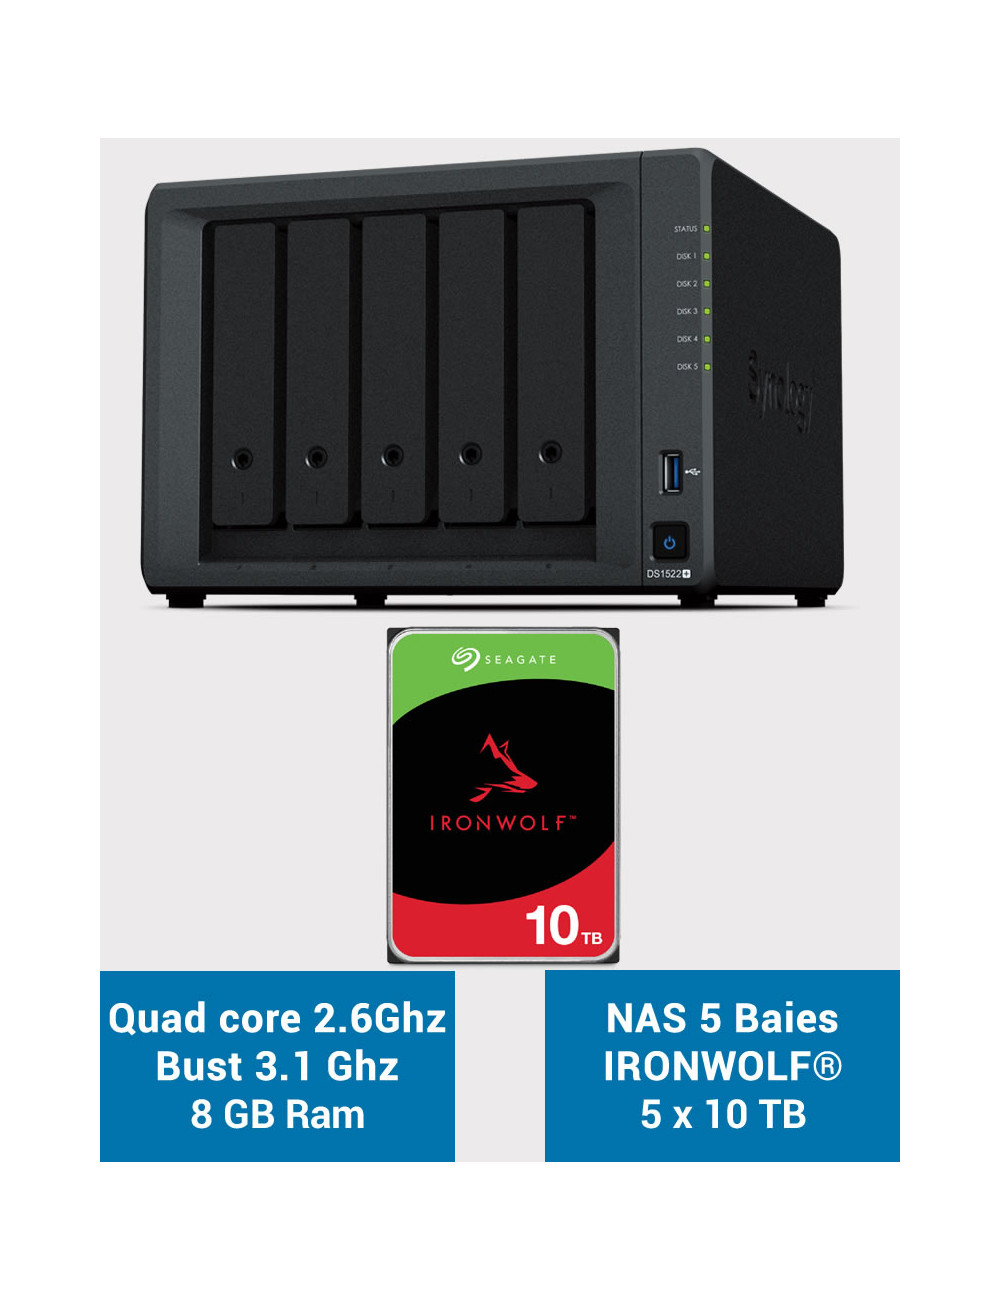 Synology DiskStation® DS1522+ Serveur NAS IRONWOLF 50To (5x10To)